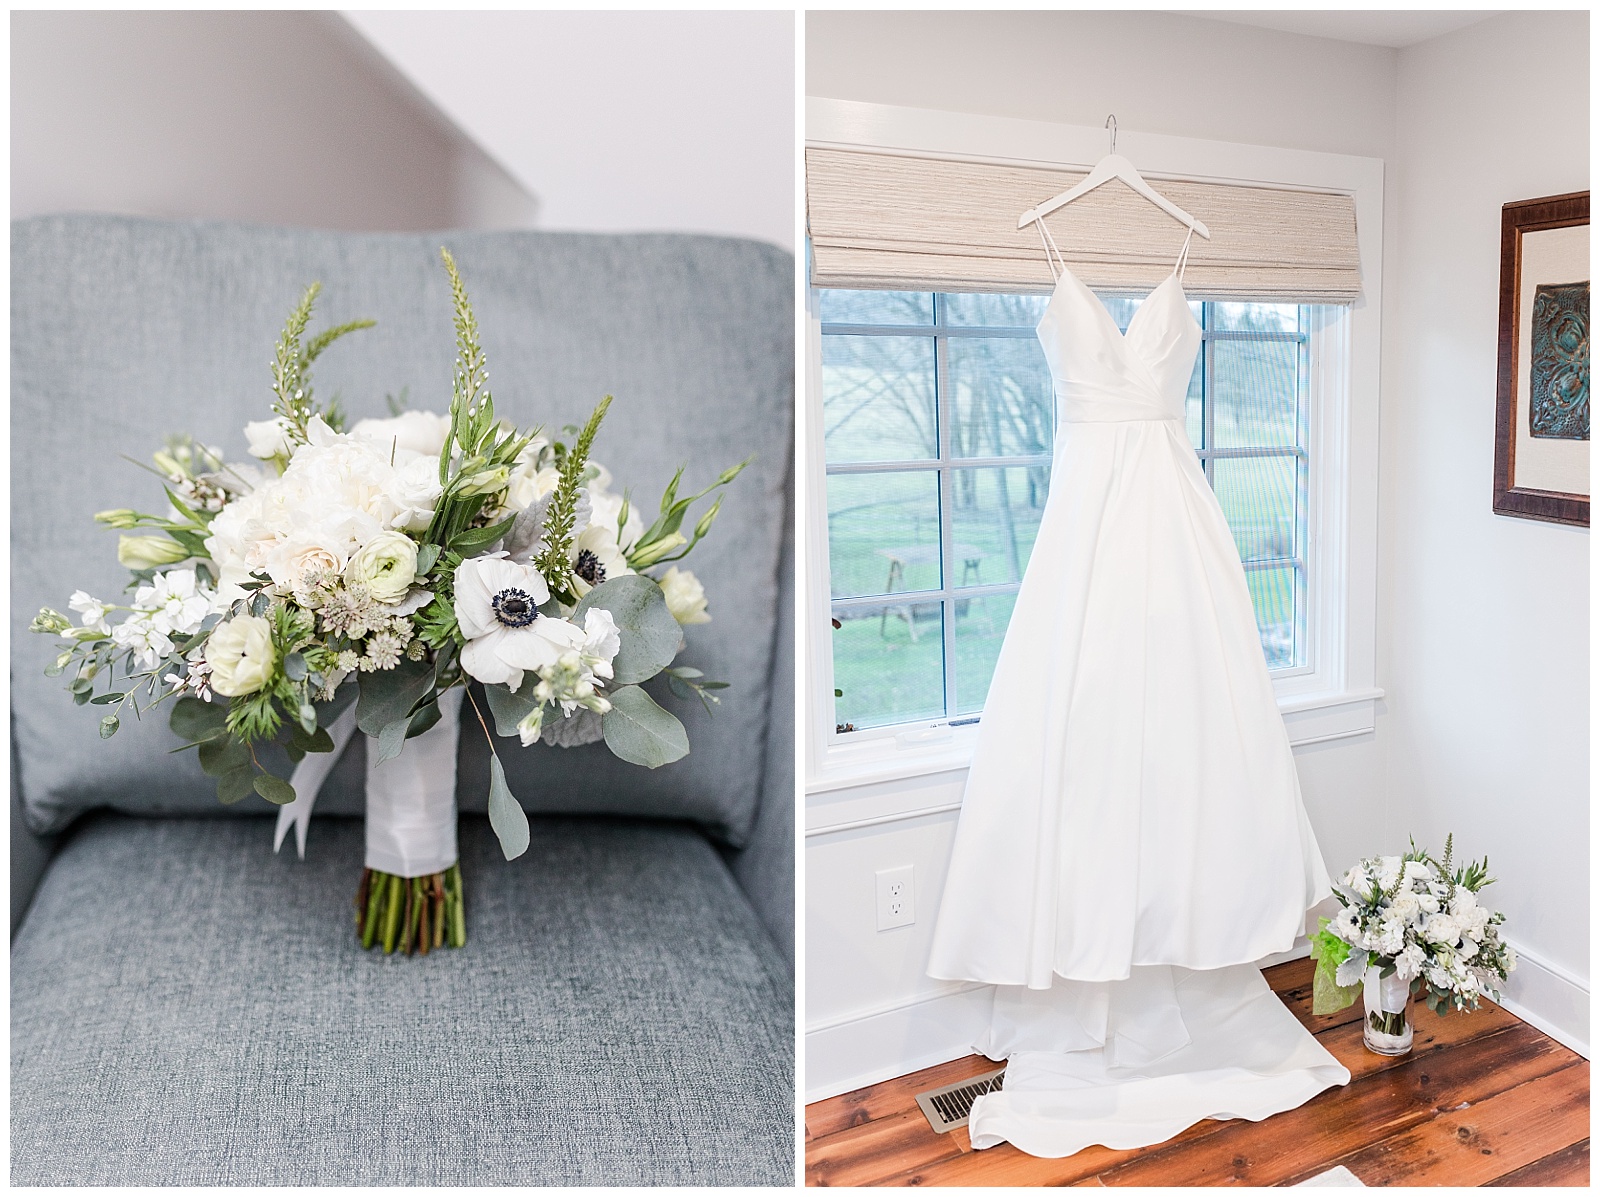 bridal bouquet of white roses and greenery next to hanging wedding gown at intimate home wedding in west chester pa